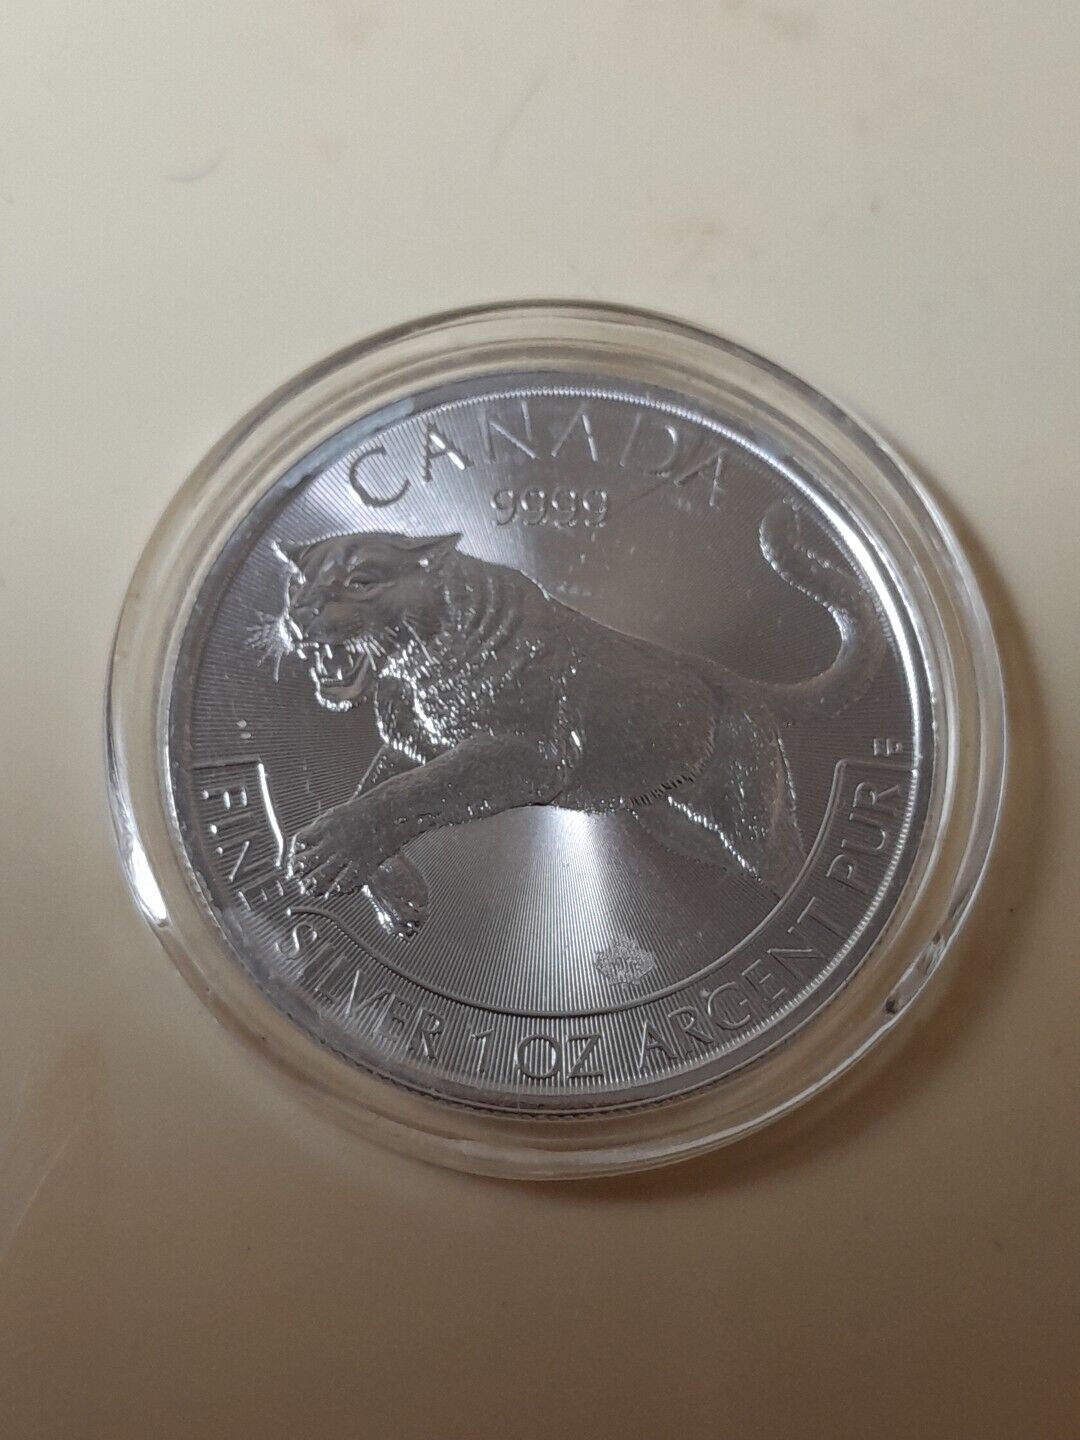 Better Date 2016 Canada 5 Dollars 1 Oz. Silver Cougar World Coin- Silver *612